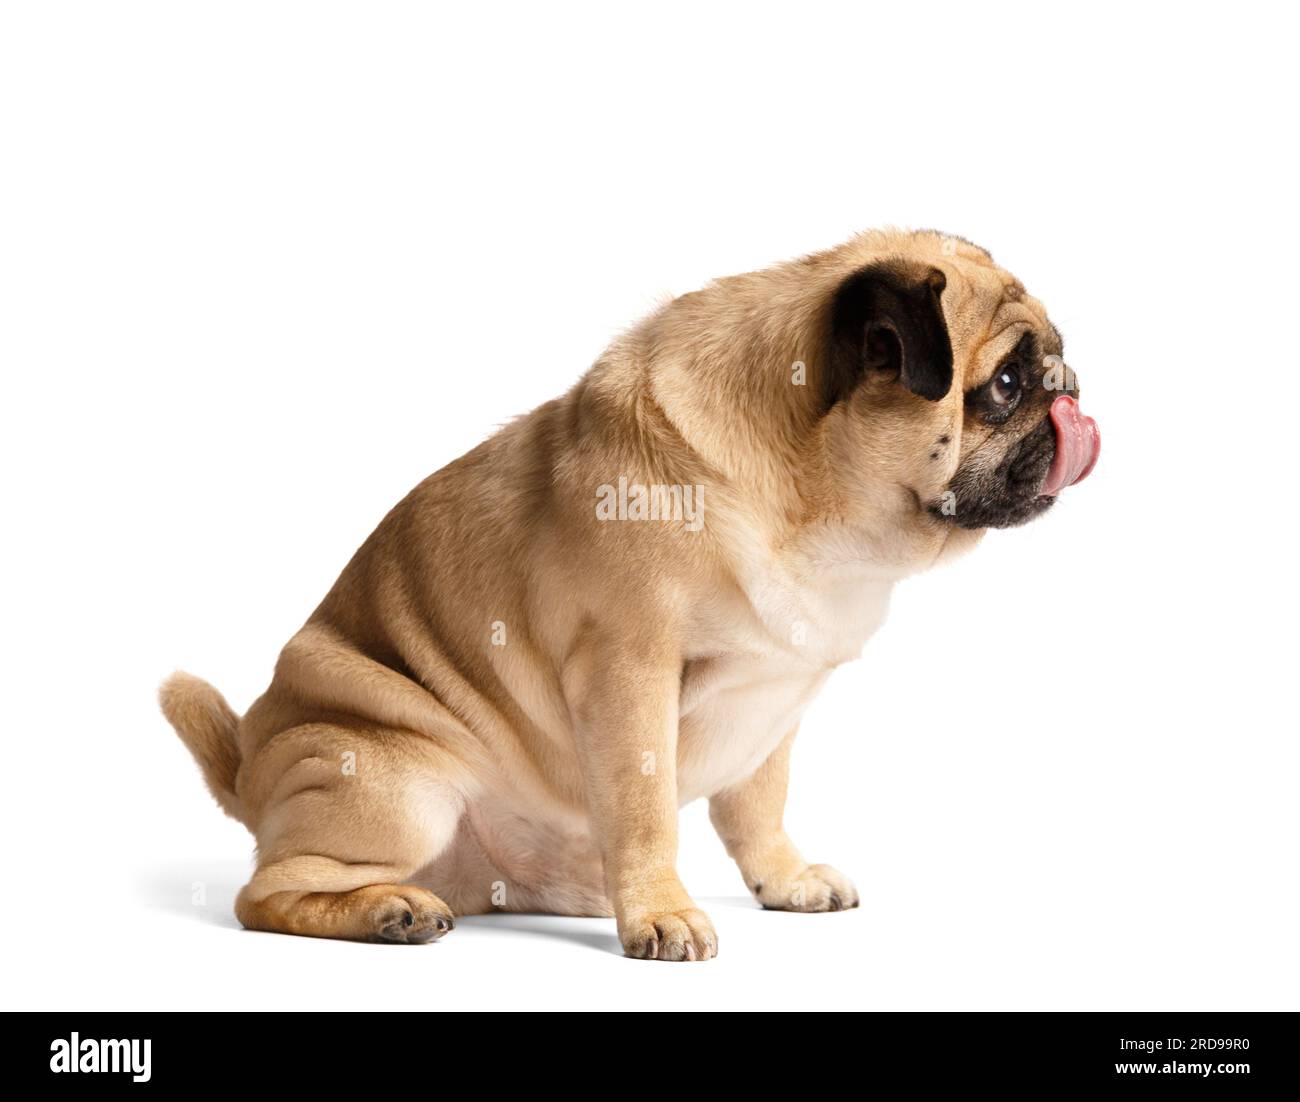 A cute funny purebred pug sits on a white background, looks away and licks his lips, touching his nose with his tongue. Stock Photo